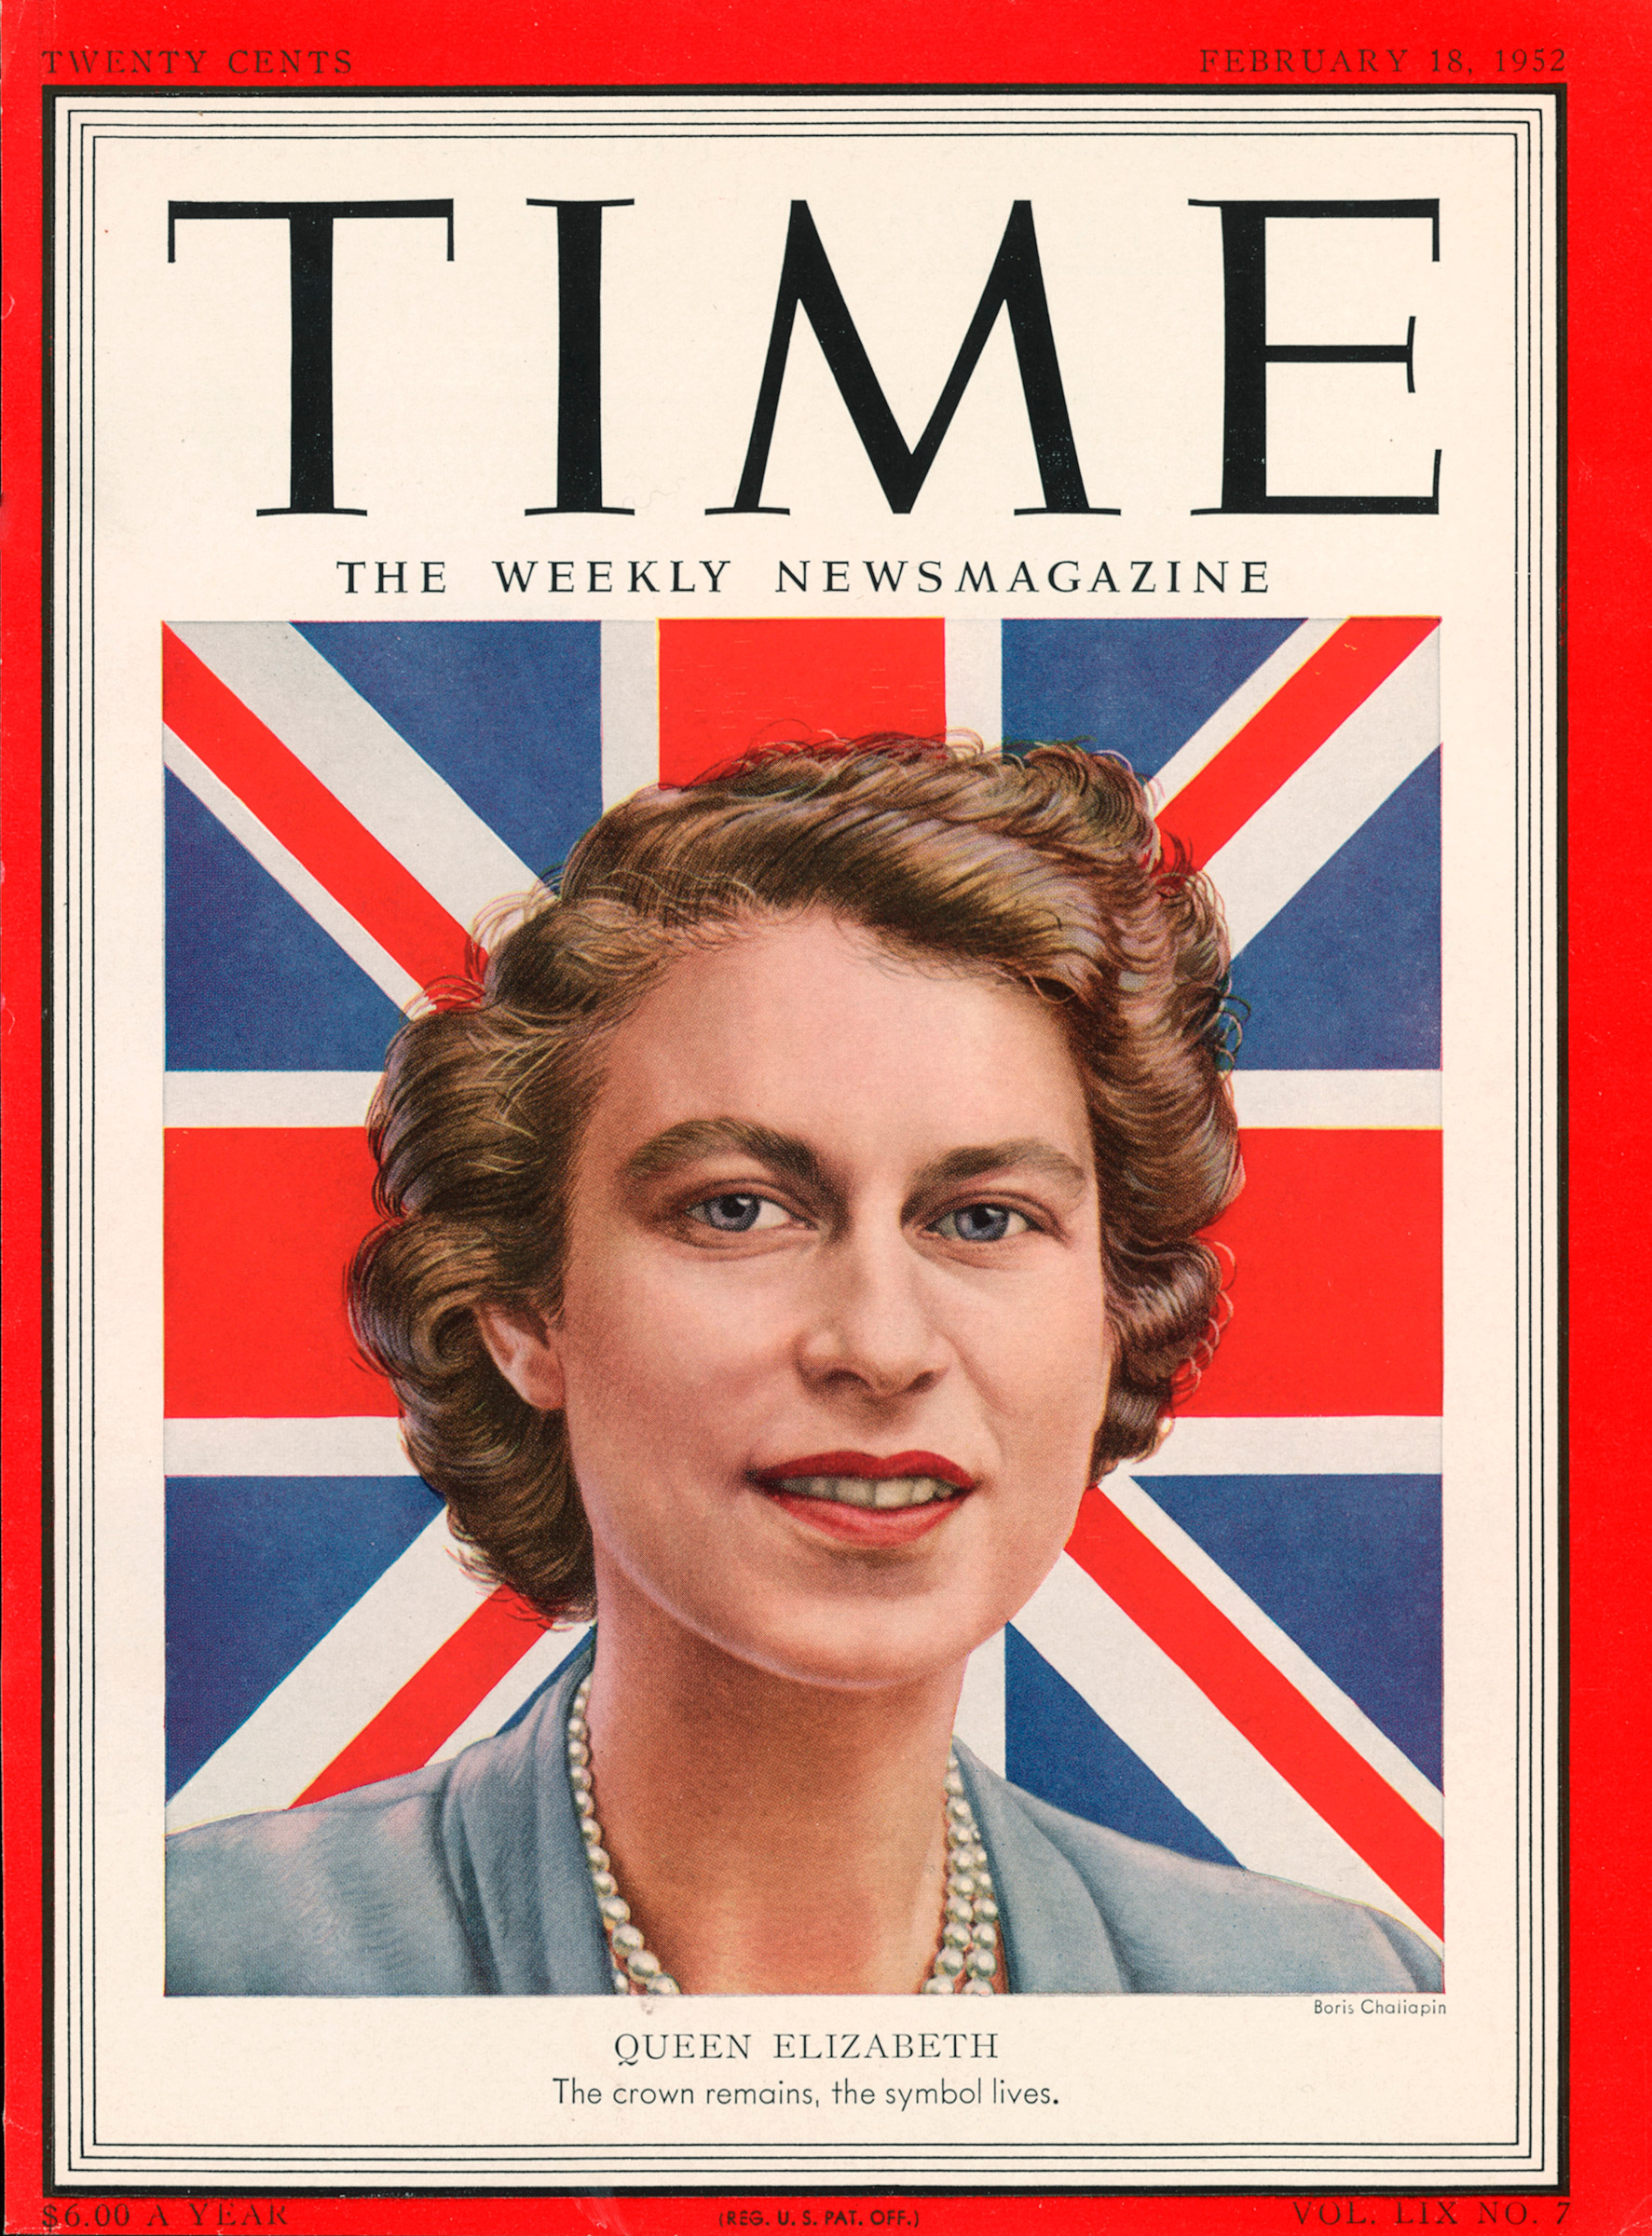 Queen Elizabeth on the Feb. 18, 1952, cover of TIME, following her ascension to the throne (Boris Chaliapin)